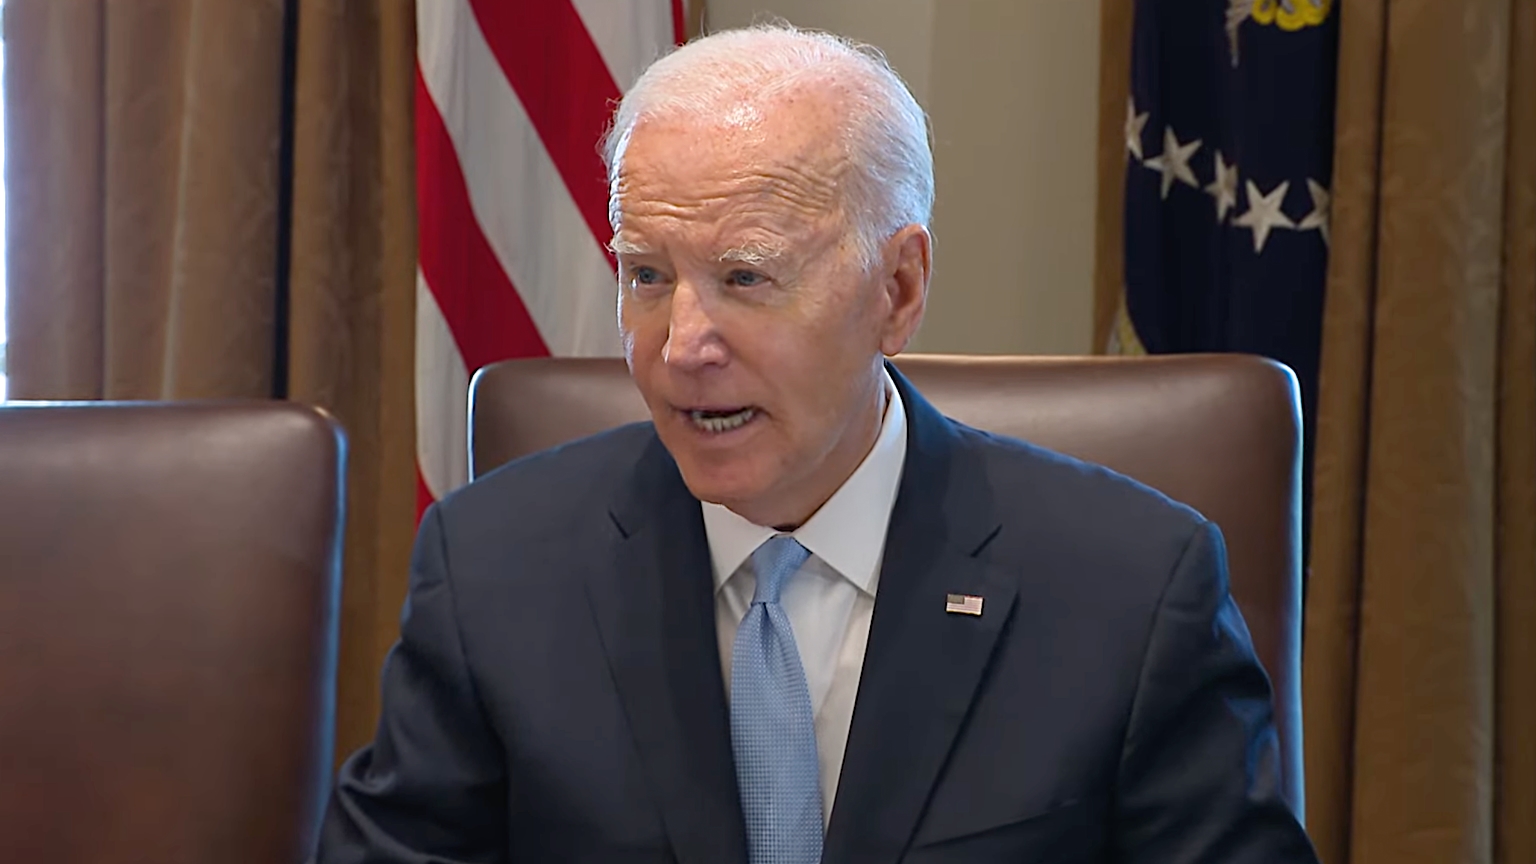 Biden’s 2024 Campaign Will Continue Flagging “Misinformation” To Big Tech